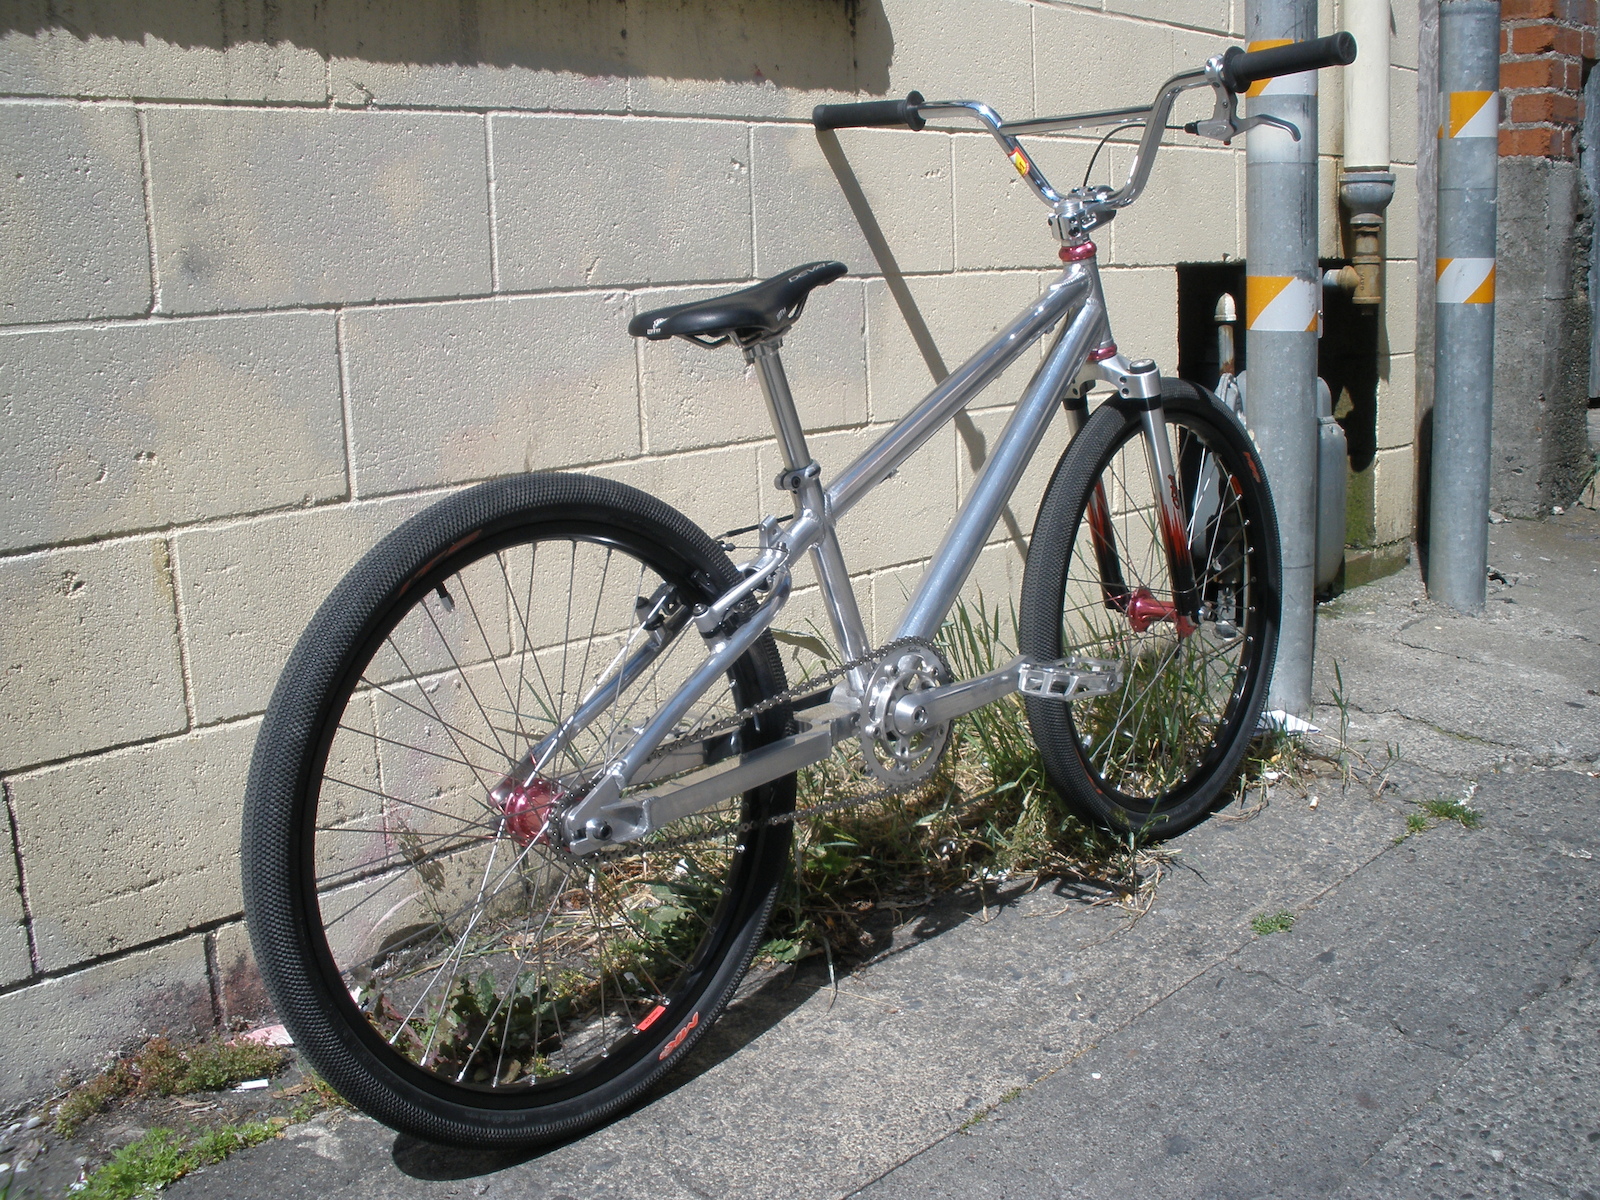 1997 Santa Cruz Jackal BMX done for now. New S&amp;M Race Bars. 21.86 lbs as pictured.